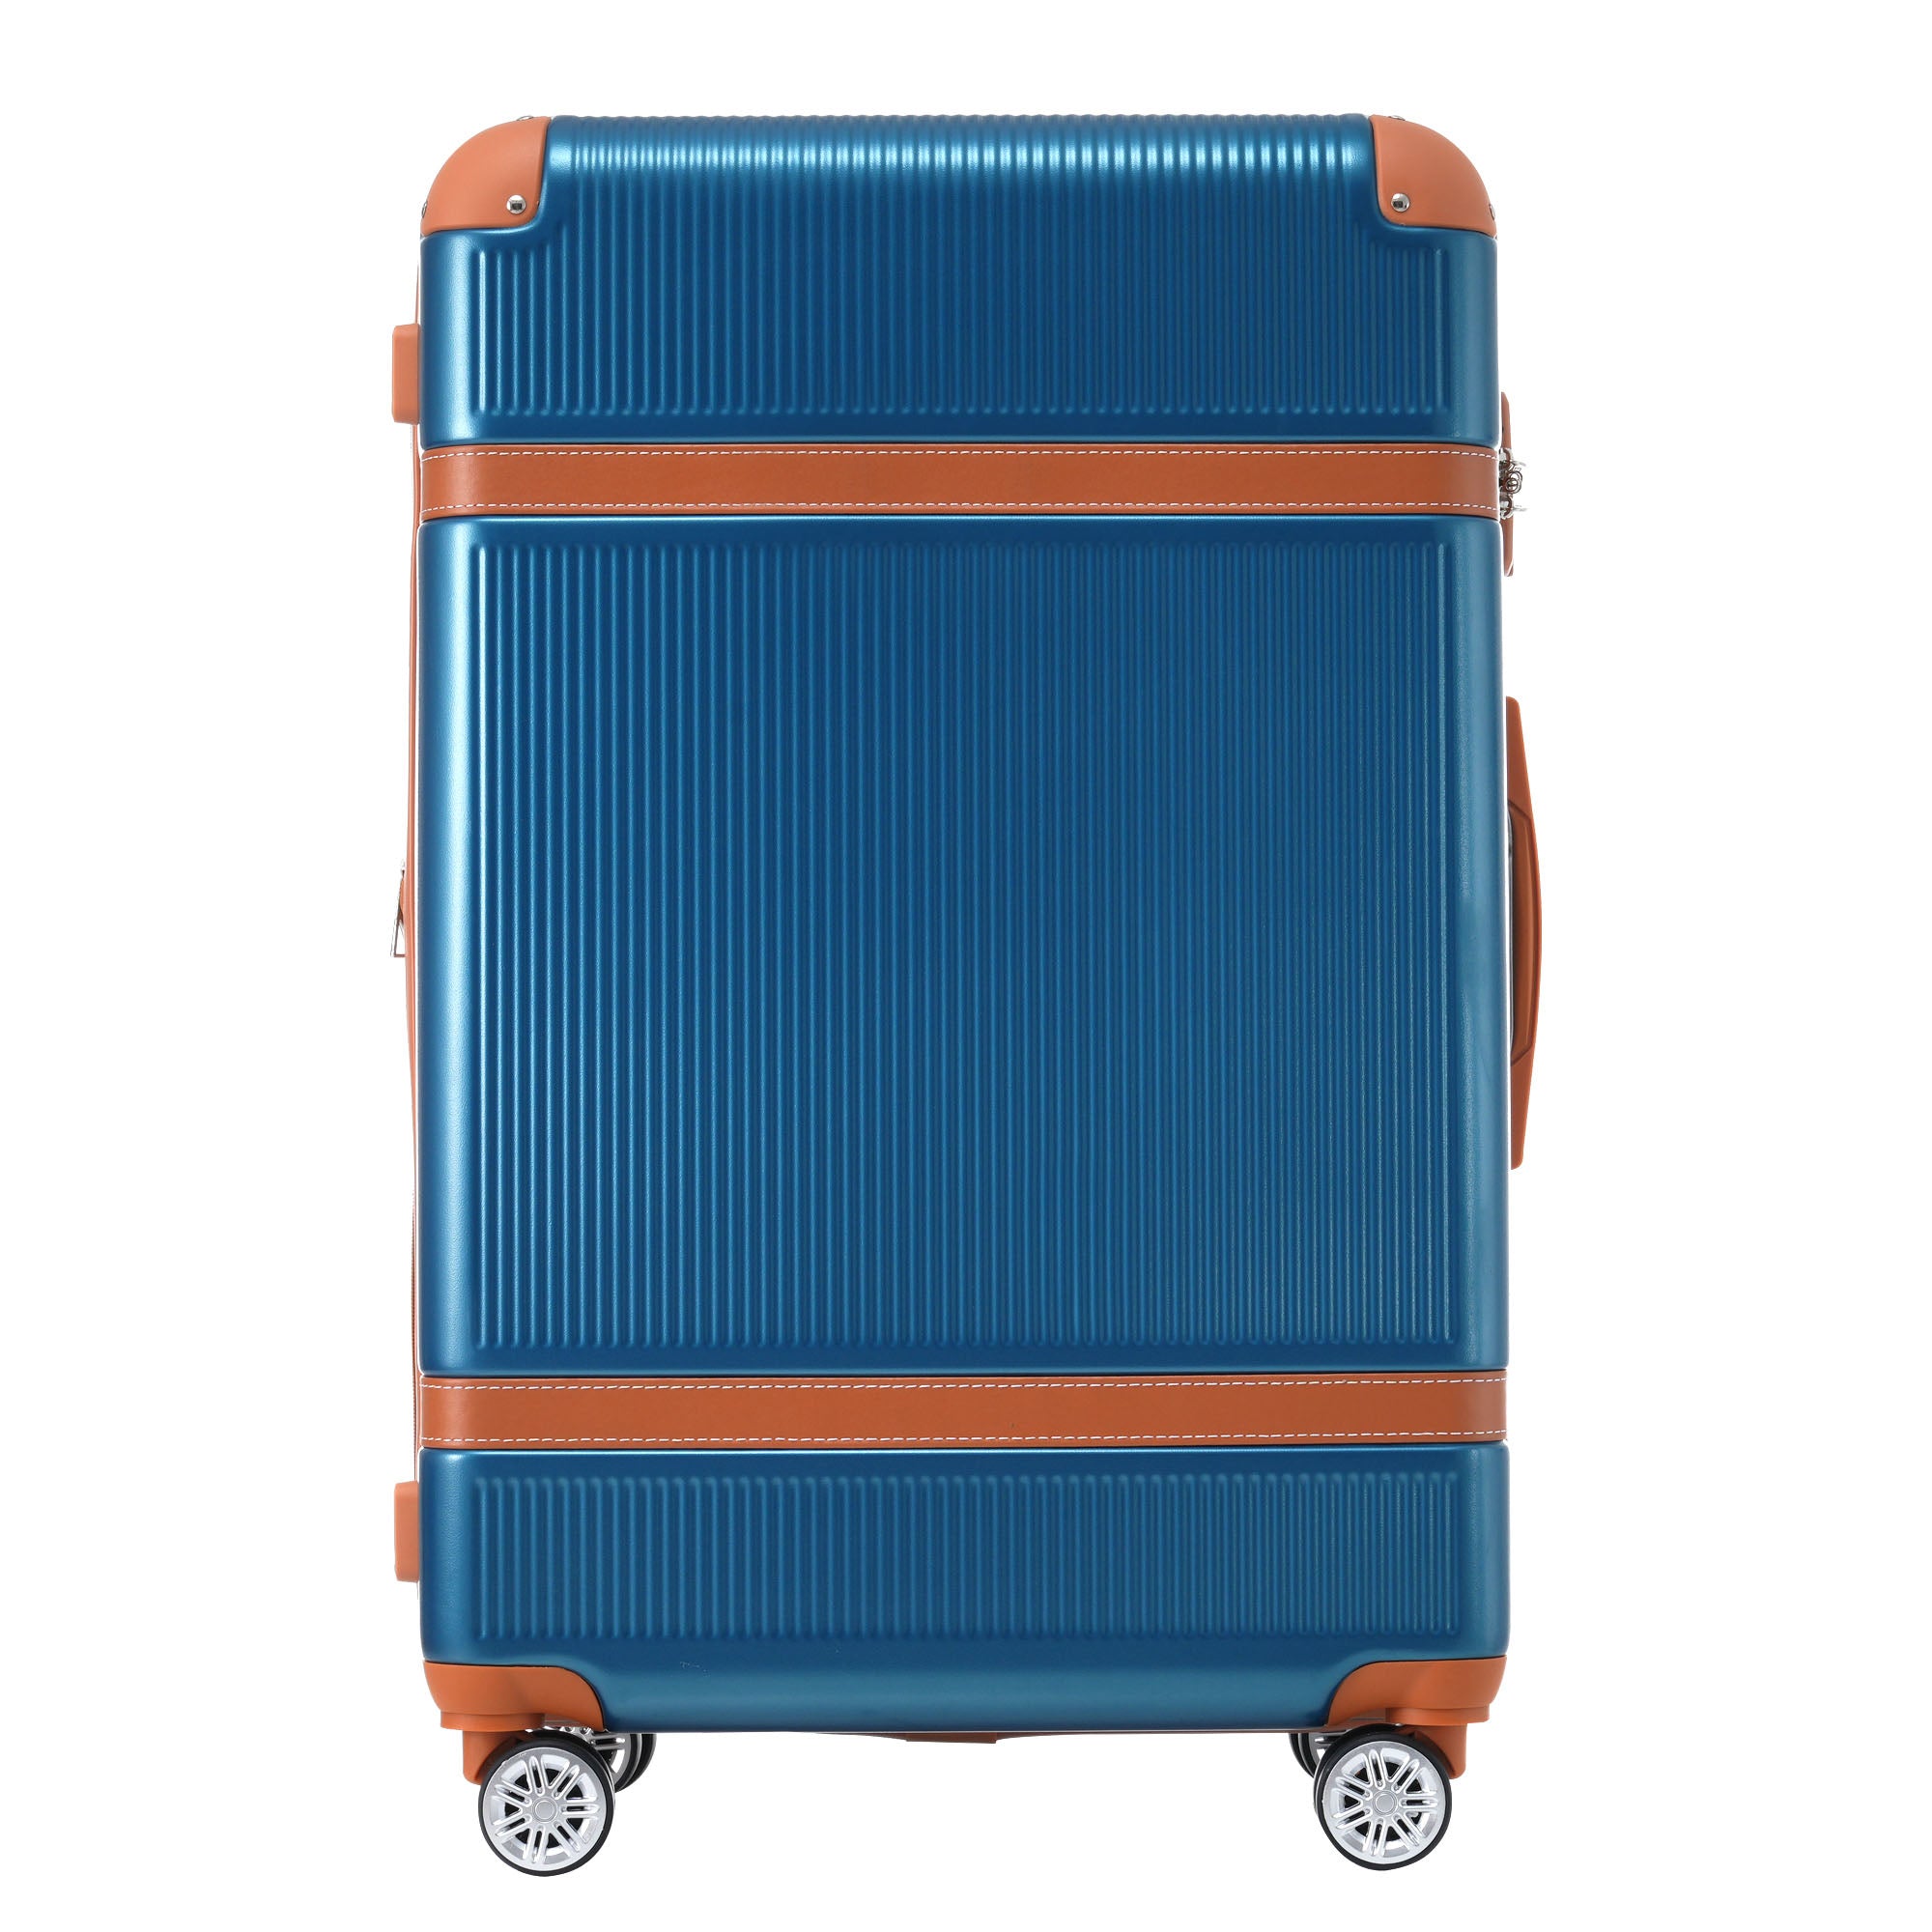 Hardshell Luggage Sets 3 Piece double spinner 8 wheels blue-abs